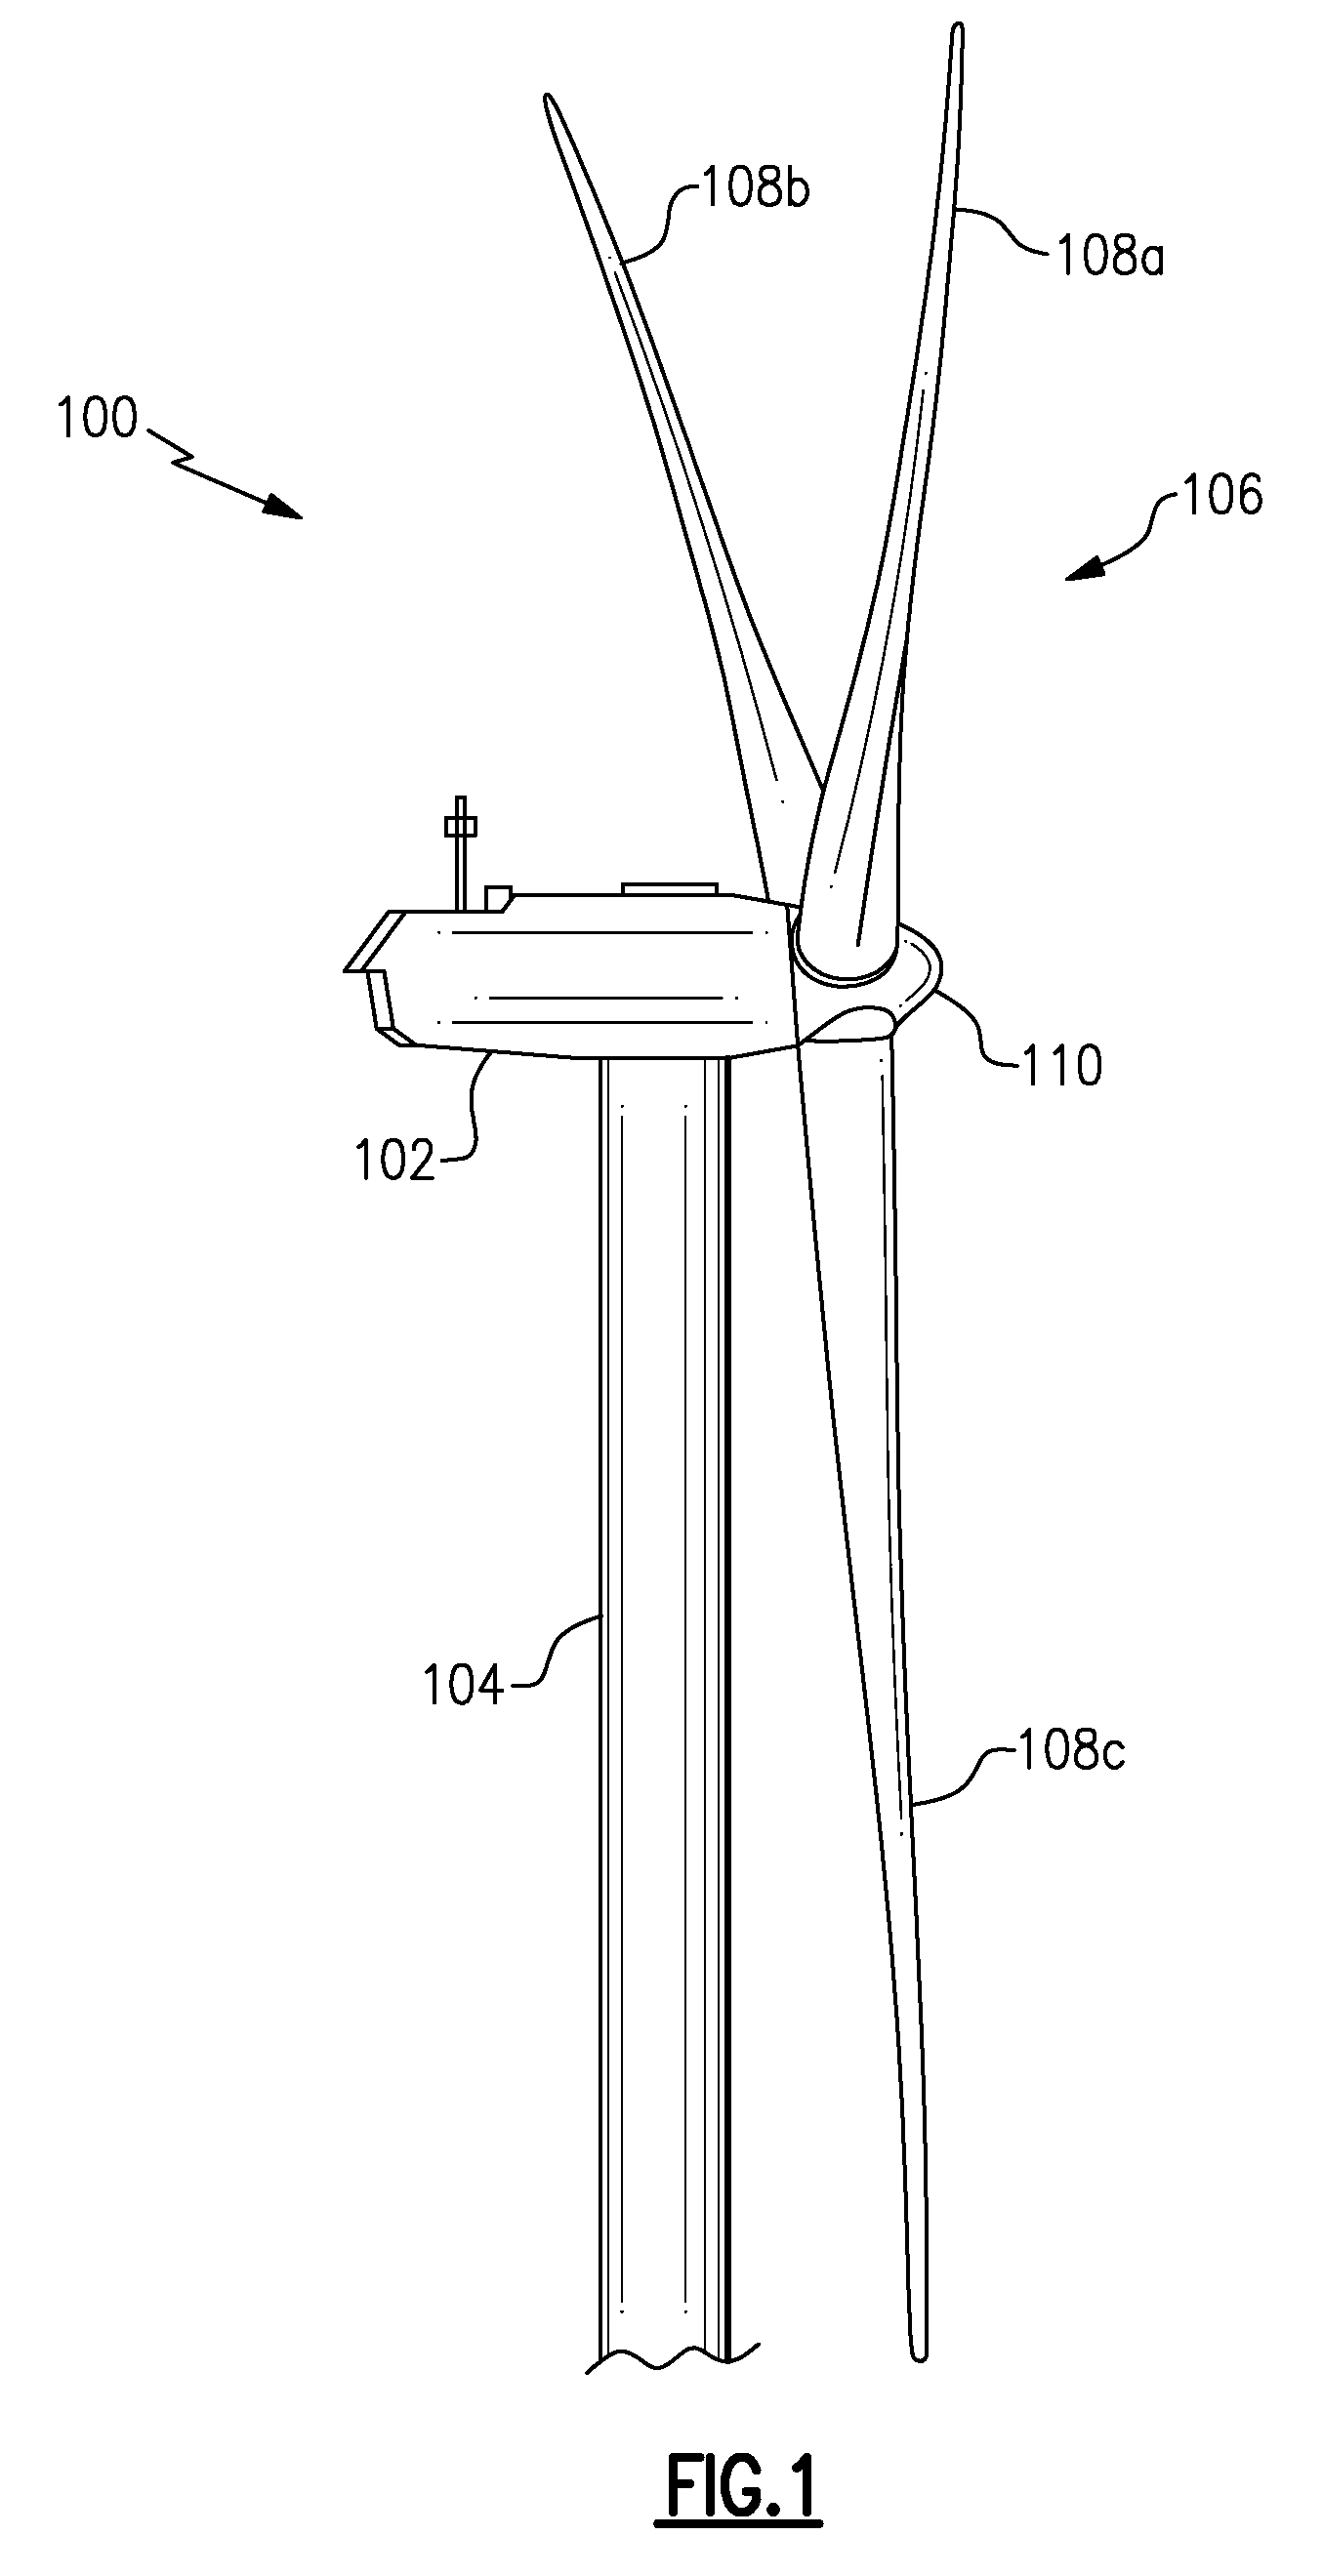 Apparatus and method for reducing asymmetric rotor loads in wind turbines during shutdown